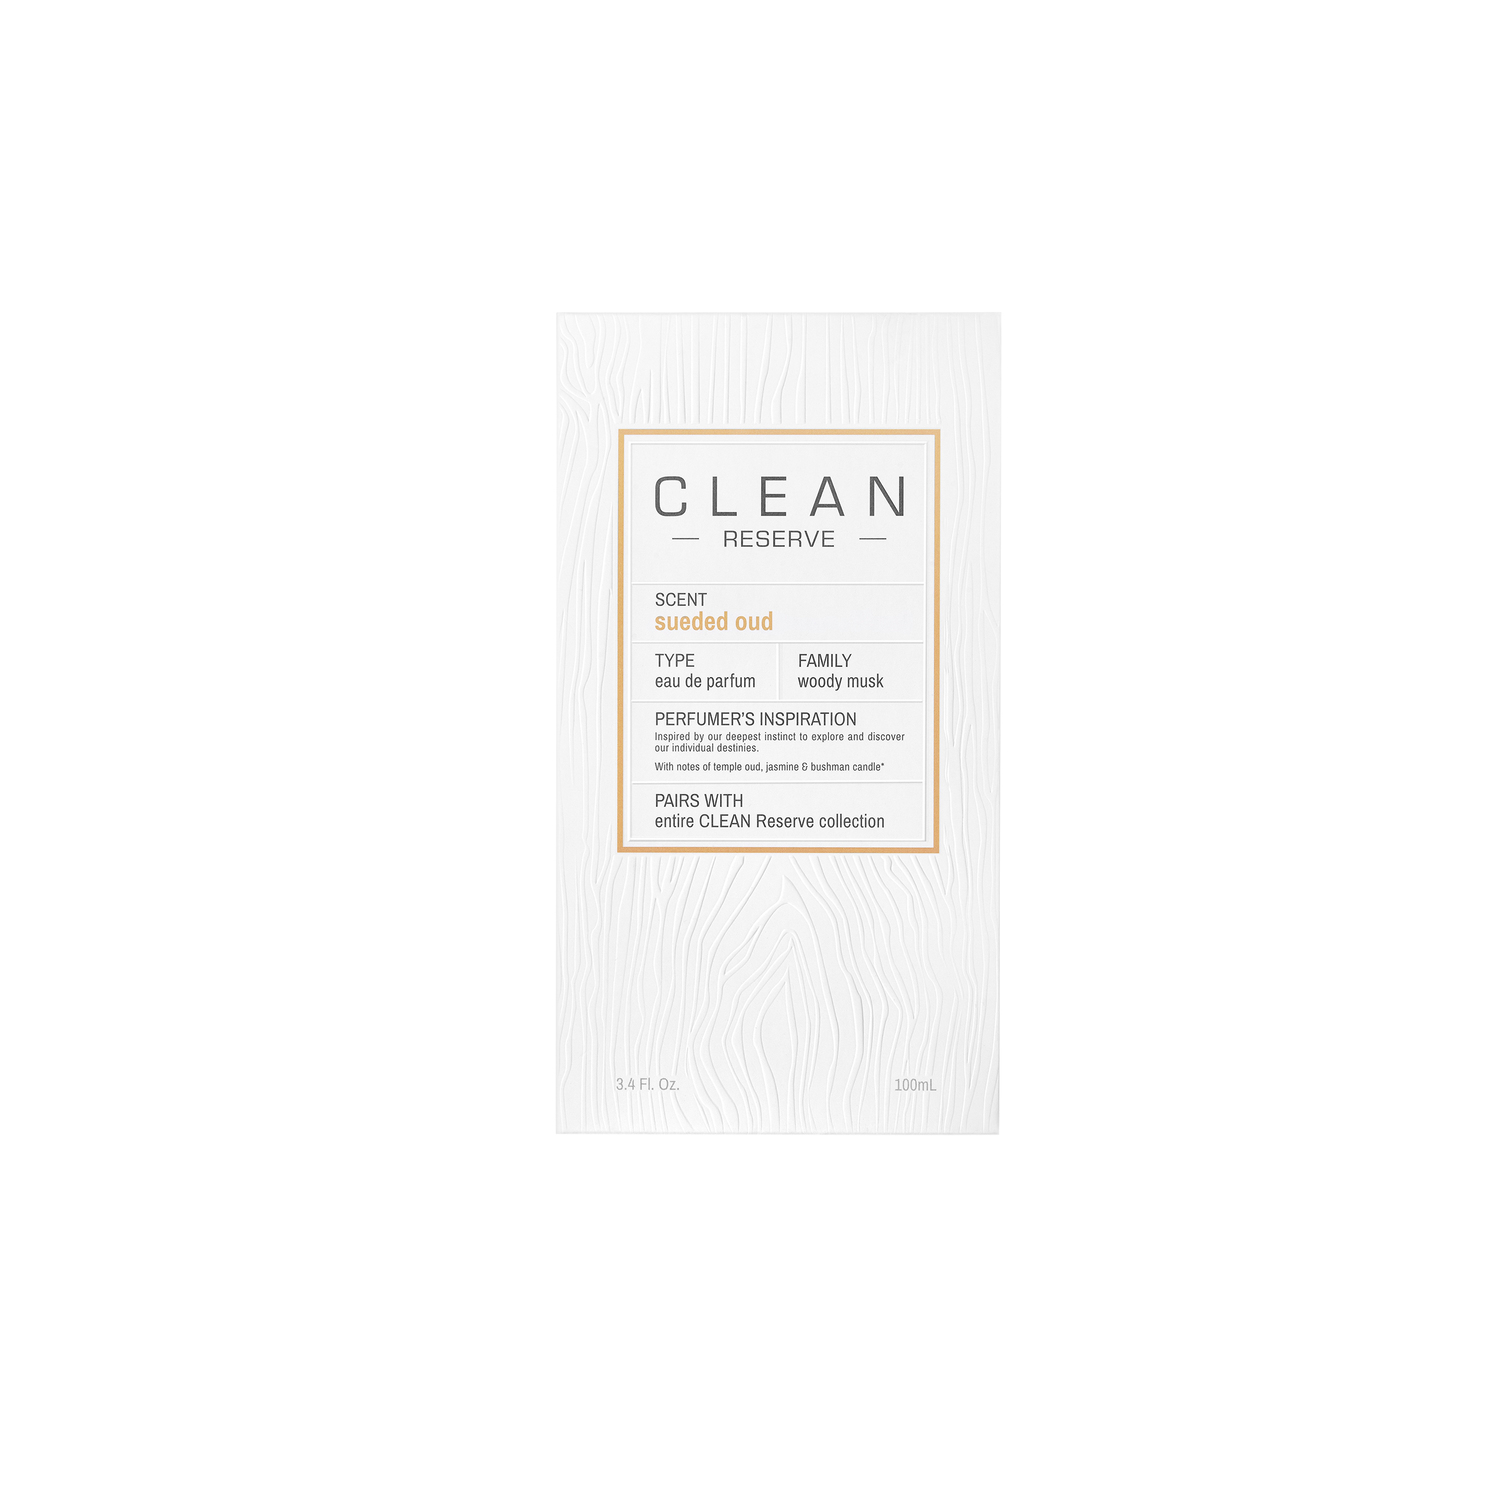 CLEAN RESERVE Sueded Oud EdP